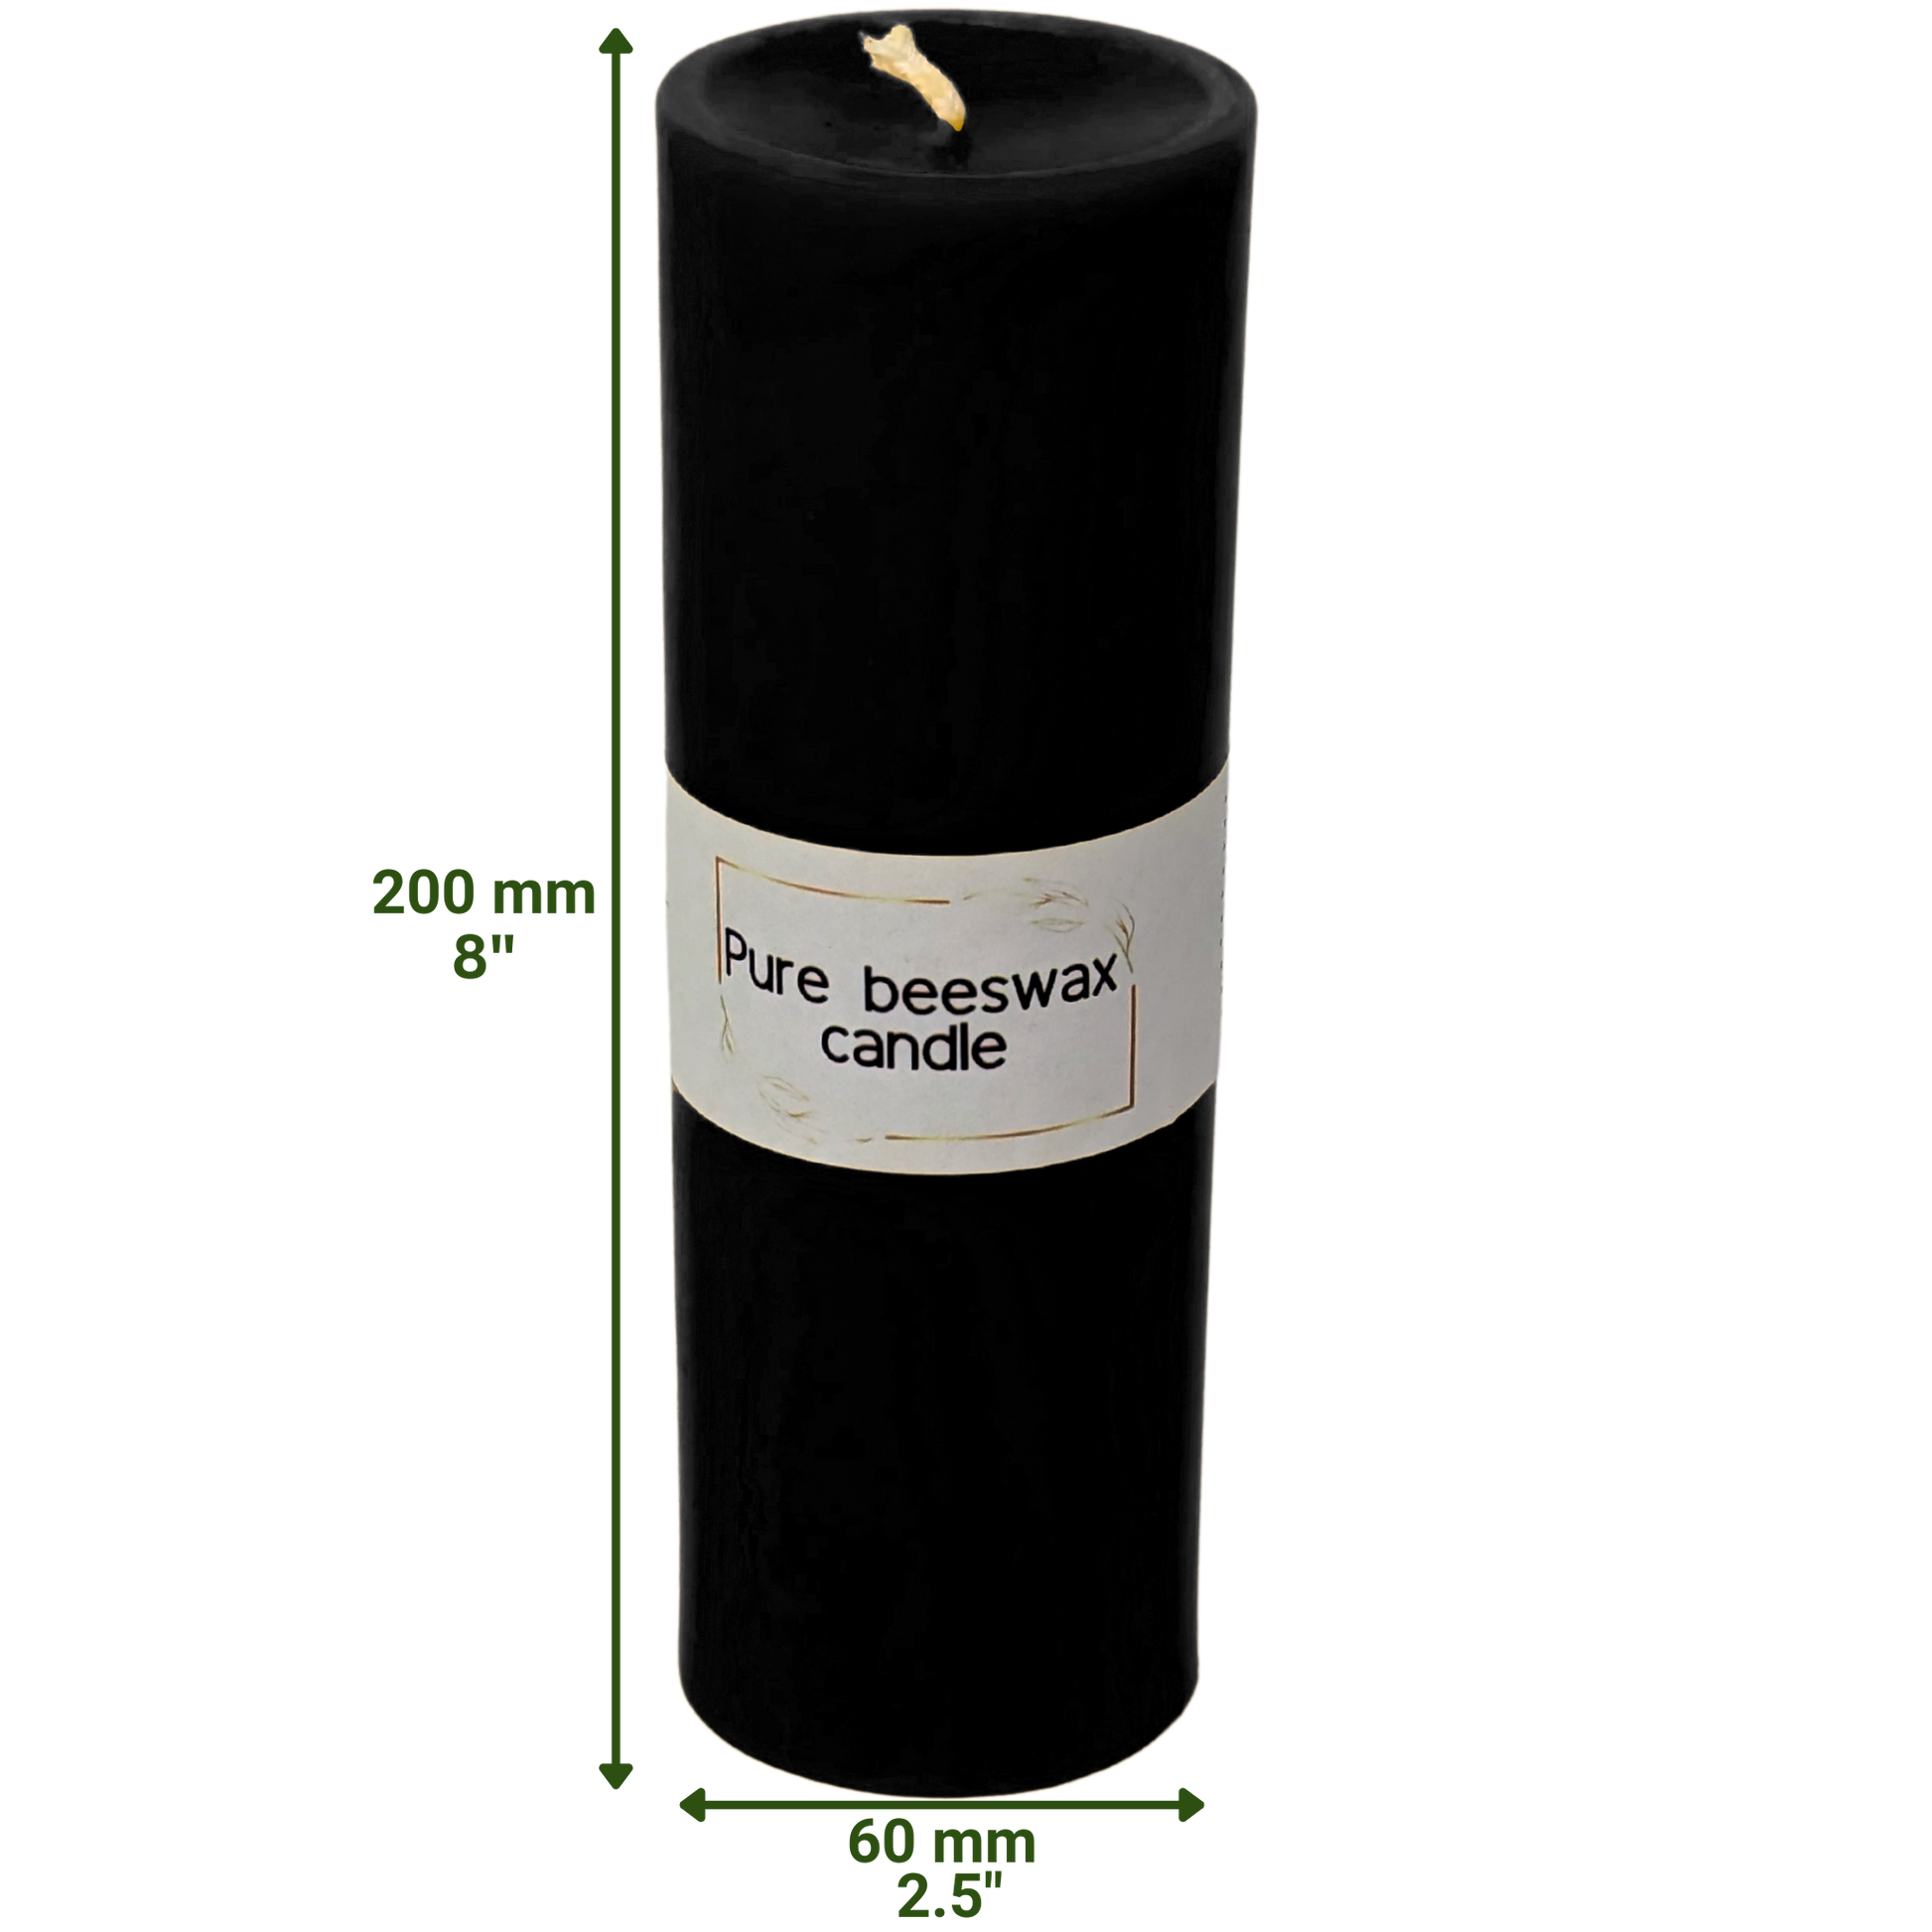 A single, pure black beeswax pillar candle lit in a dim room, casting warm, inviting shadows and creating a peaceful, tranquil ambiance.